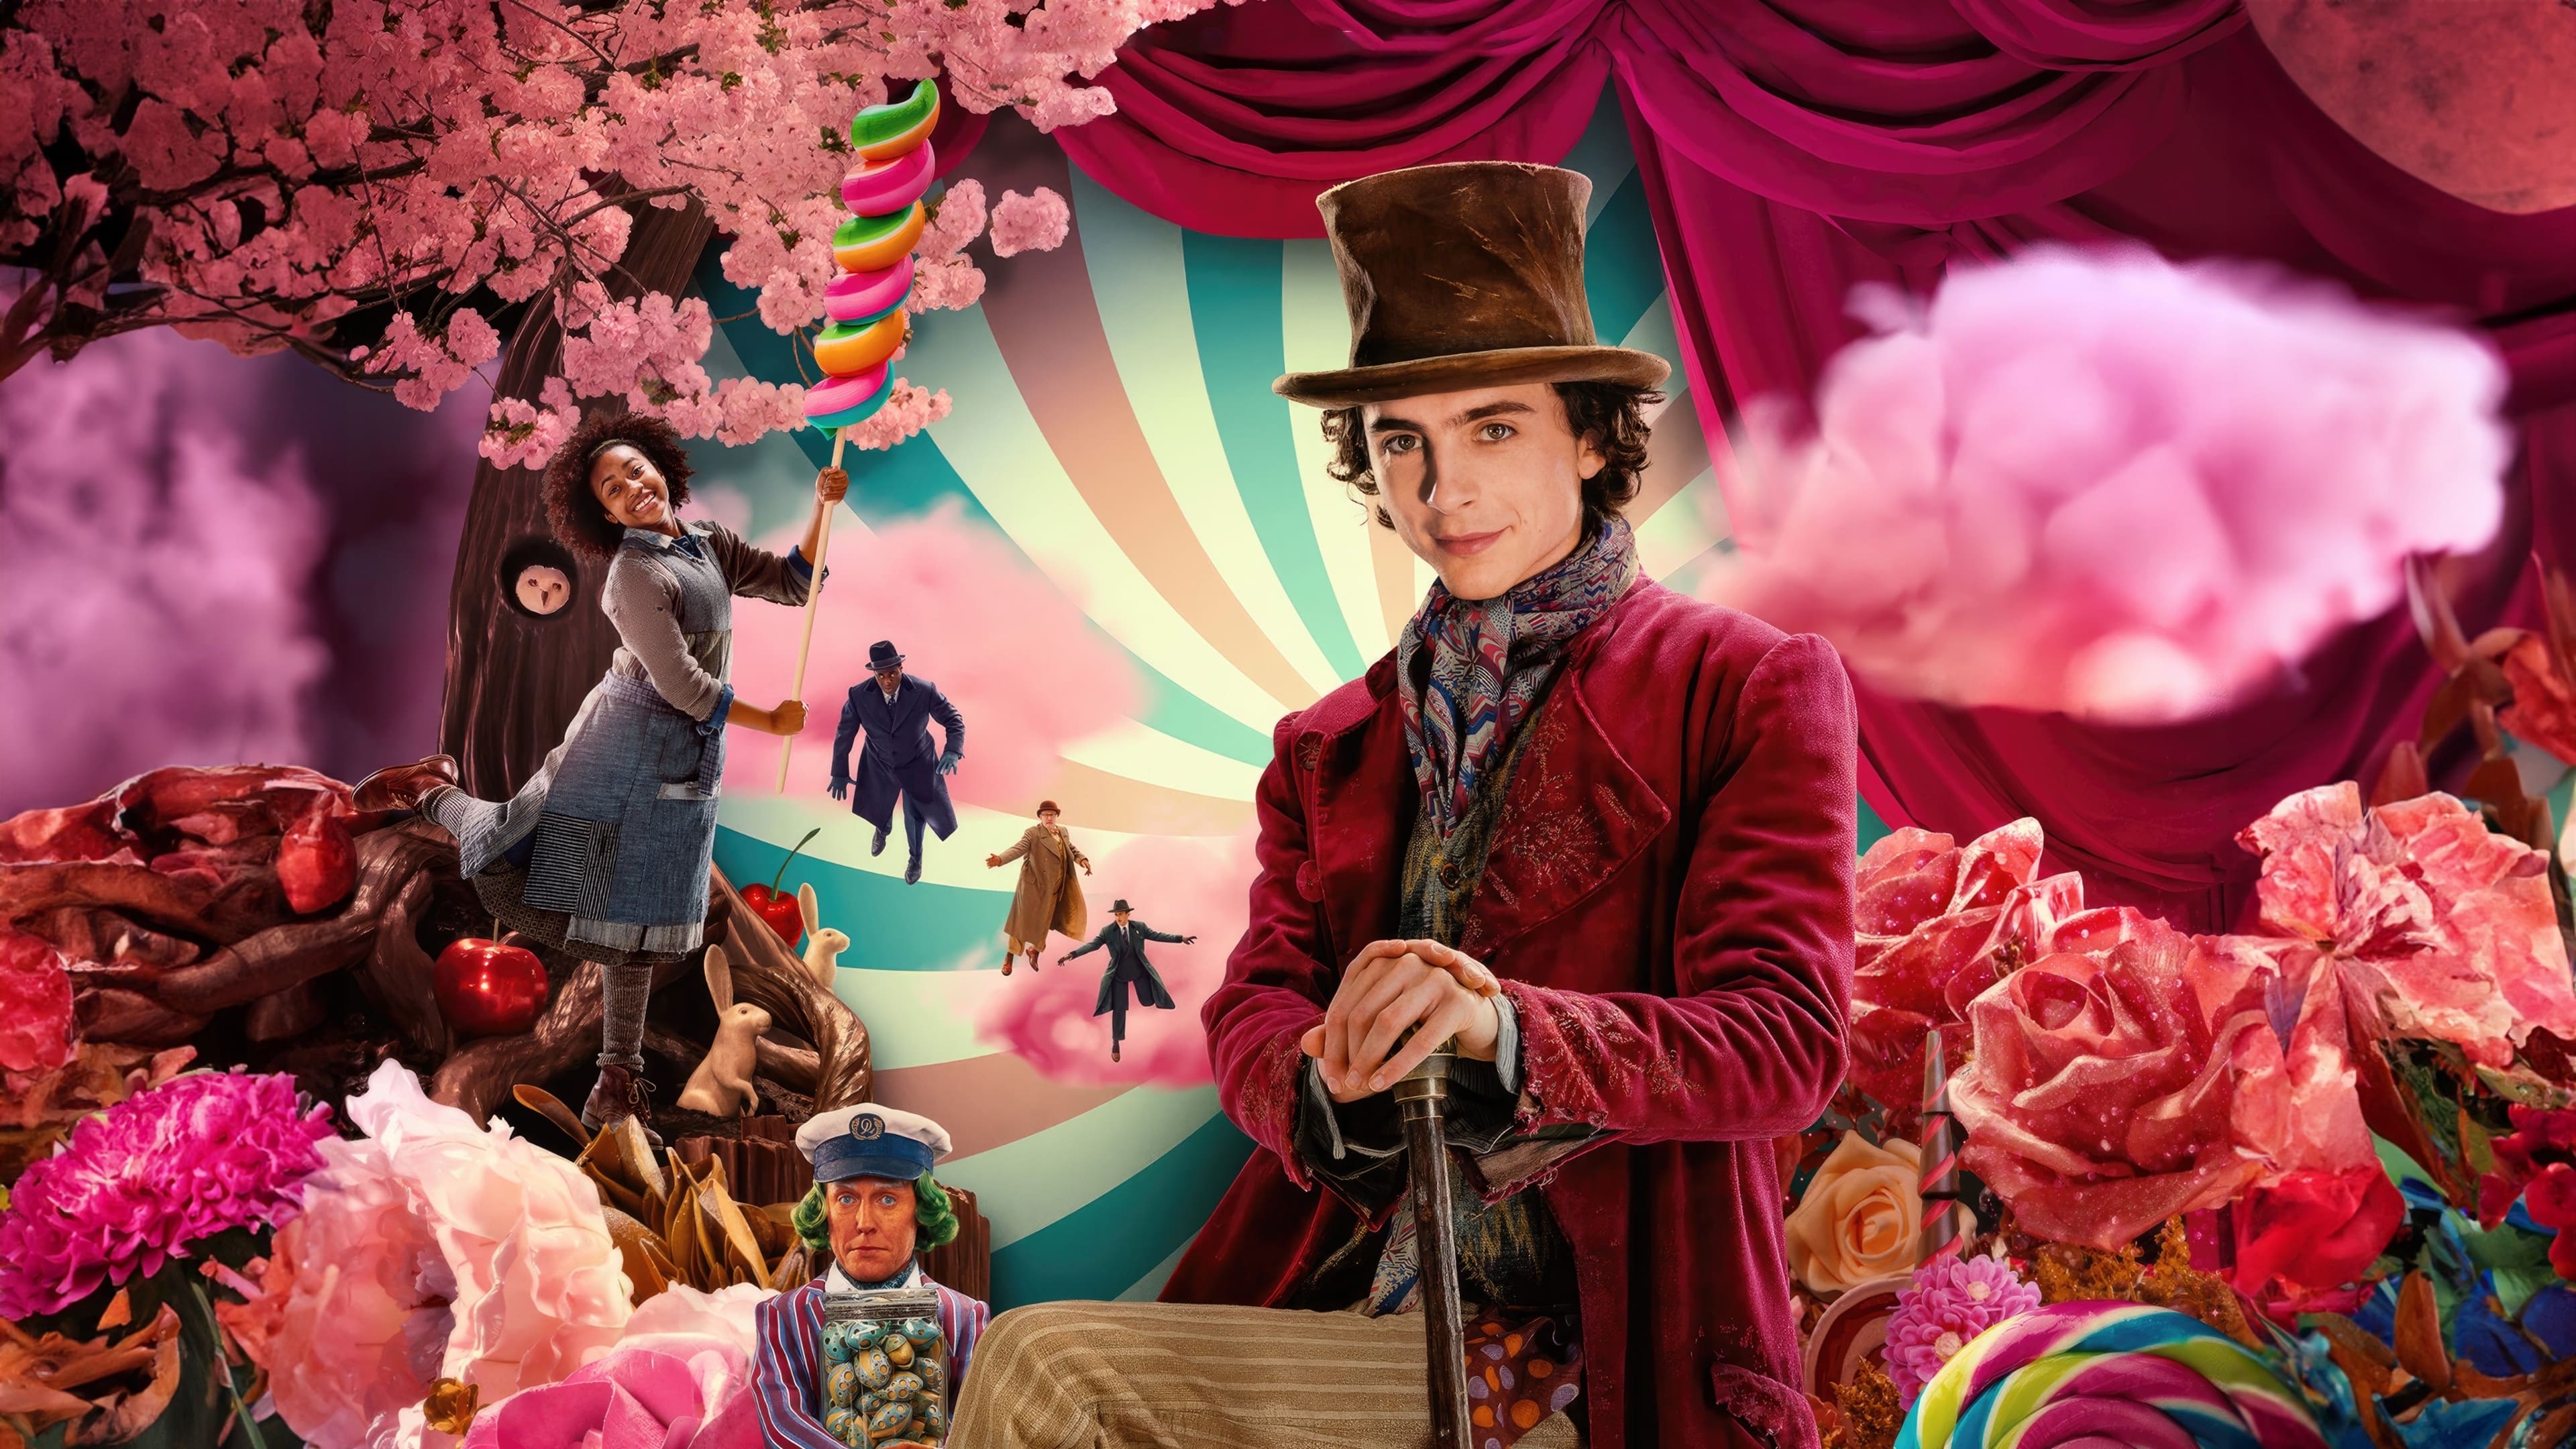 Graphic featuring candy, florals, and the cast of "Wonka," with Timothée Chalamet dressed as Wonka in the center